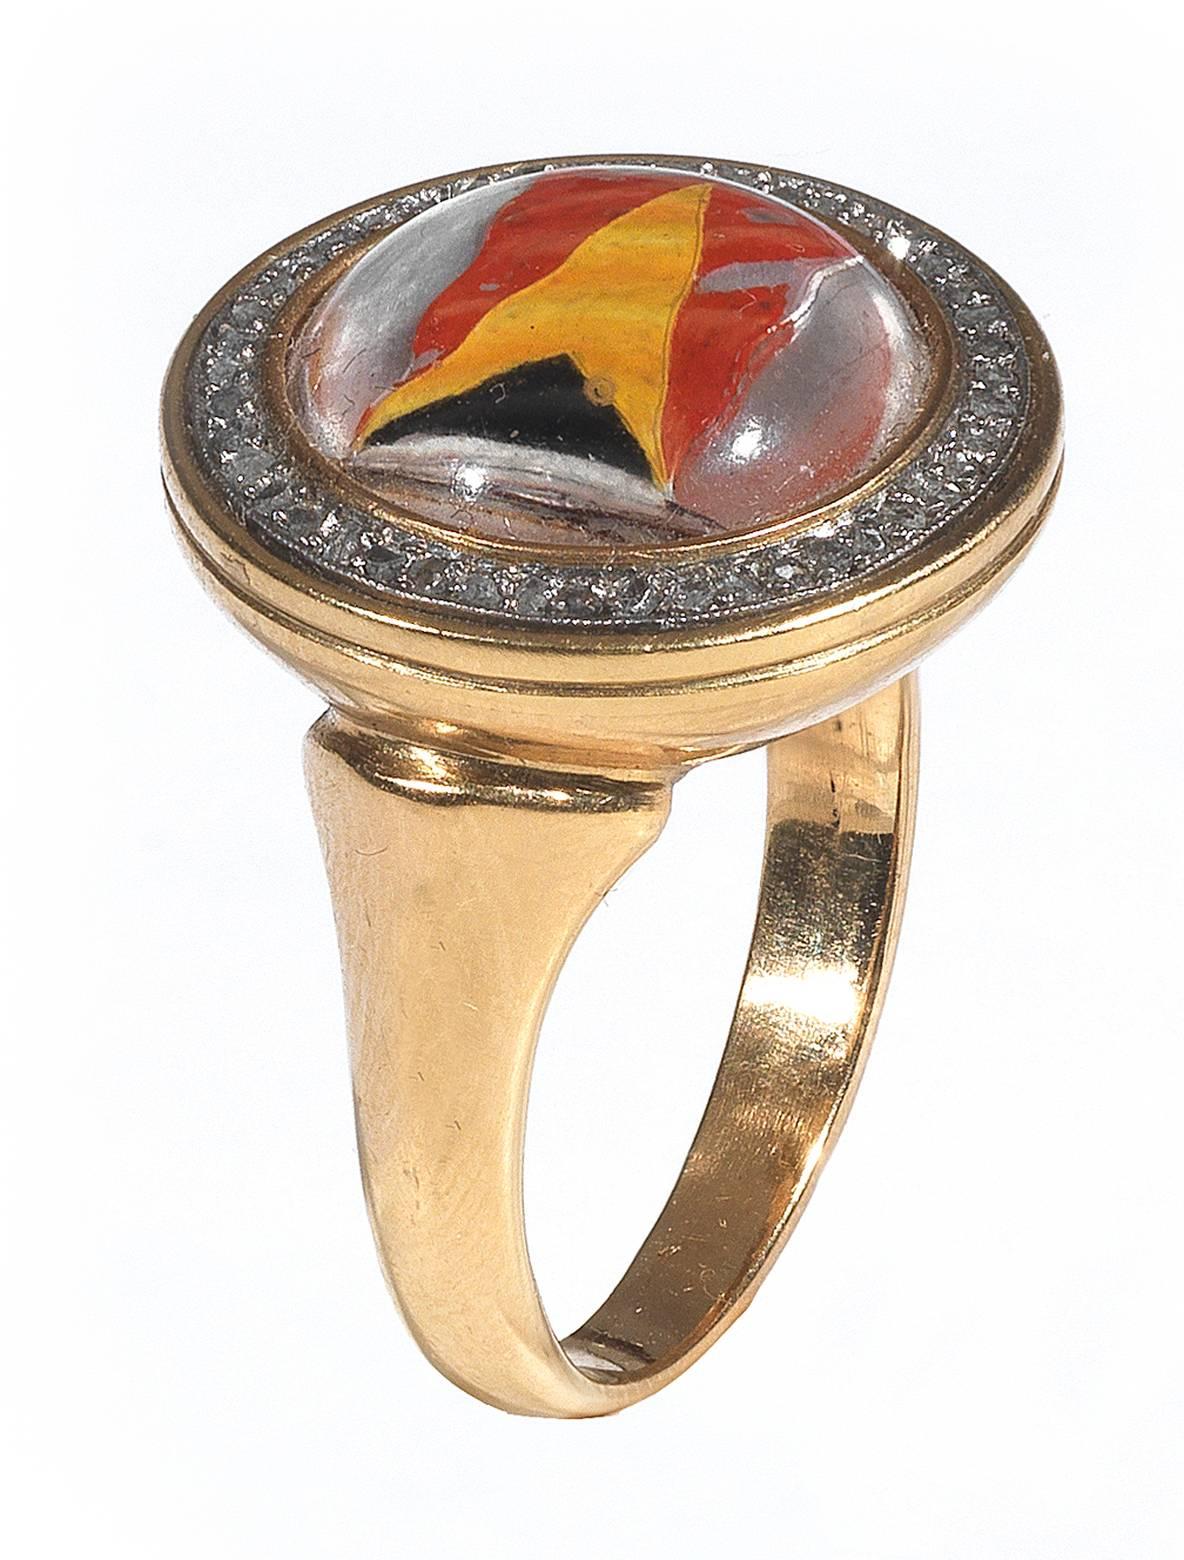 With a domed round rock crystal reverse intaglio painted to depict three colors Navy flag

To a rose-cut diamond frame mounted in silver and 18Kt Gold.

Weight: 9.8 gr

English, 1890 ca

Size 7